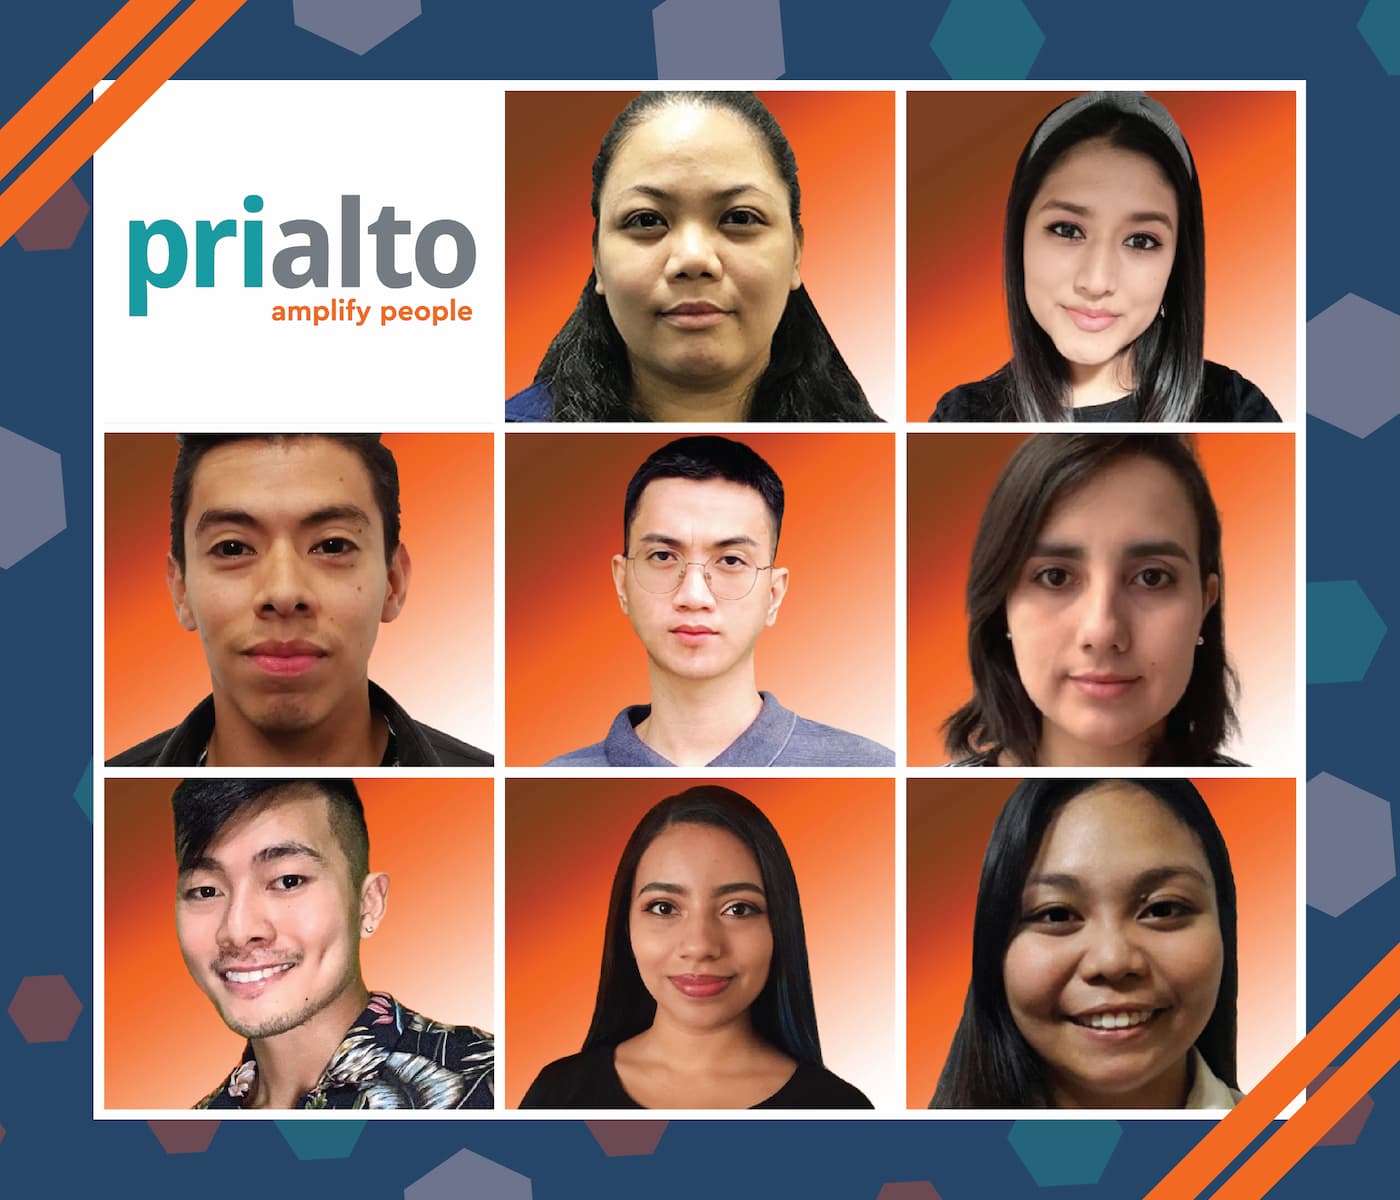 What Makes Prialto Virtual Assistants Different?